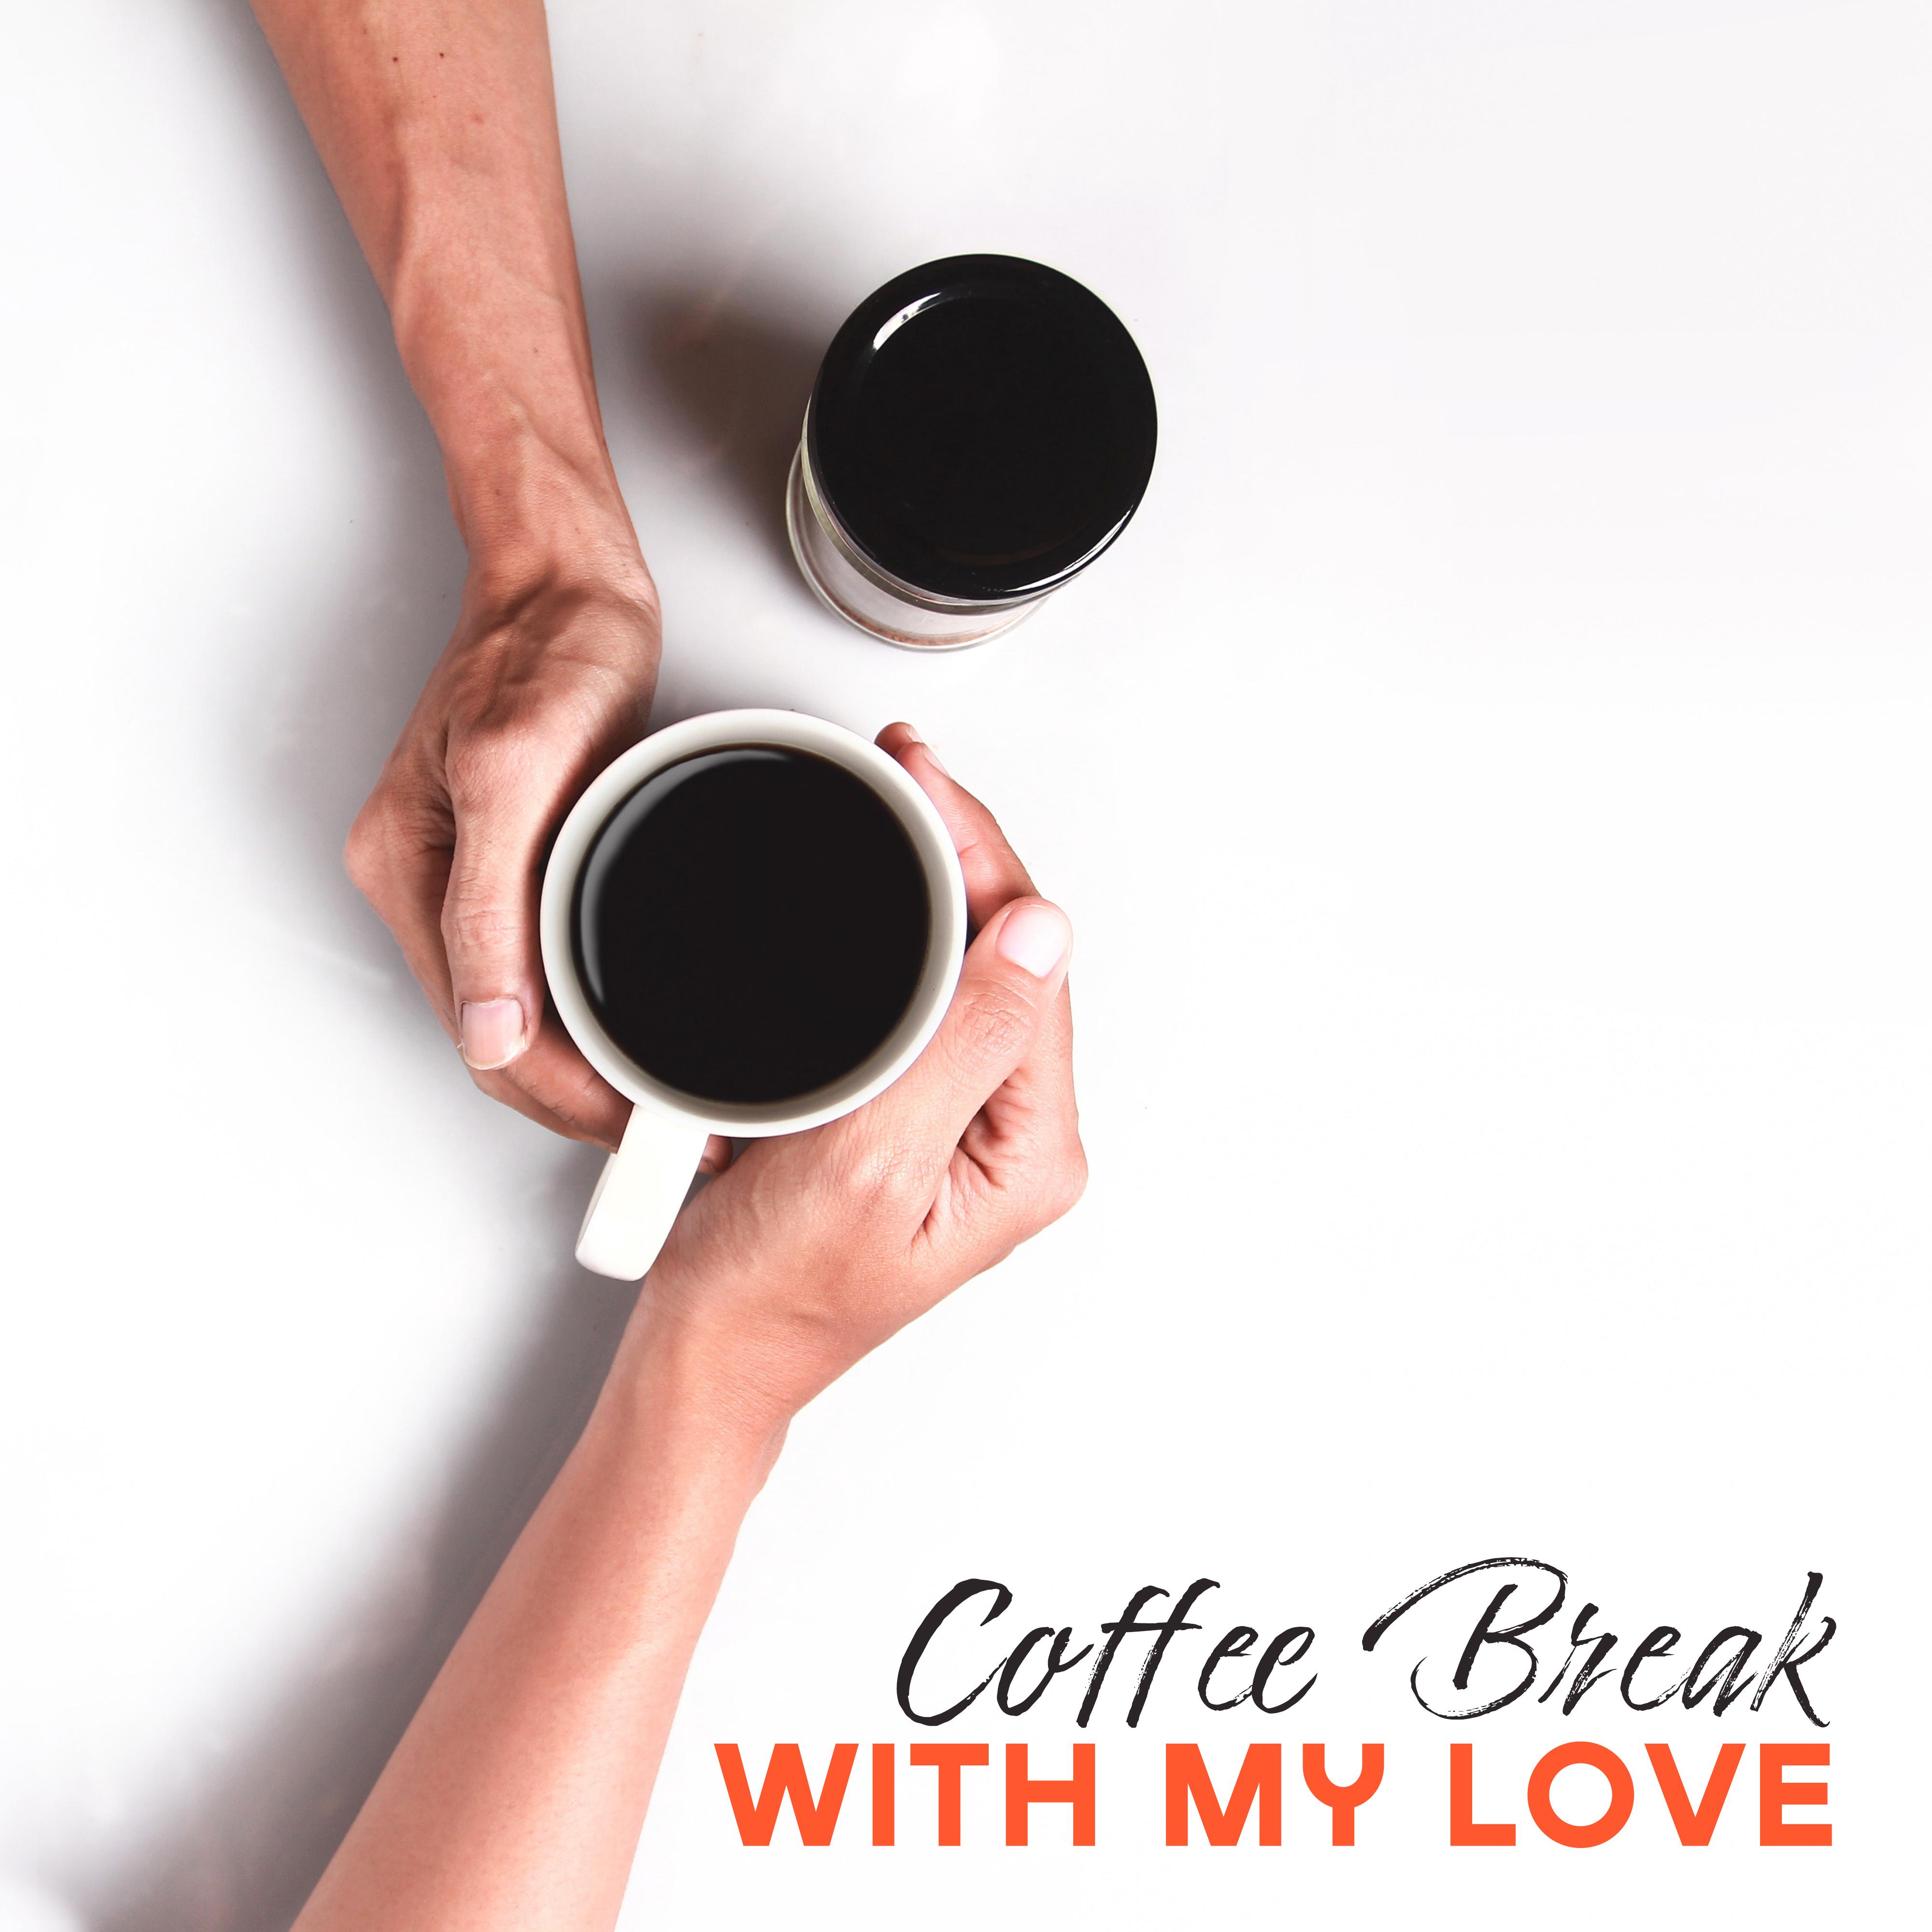 Coffee Break with My Love  Smooth Jazz Relaxing Music, Easy Listening Melodies for Couple' s Meeting, Soft Background Sounds for Cafe, Calming Down, Stress Relief